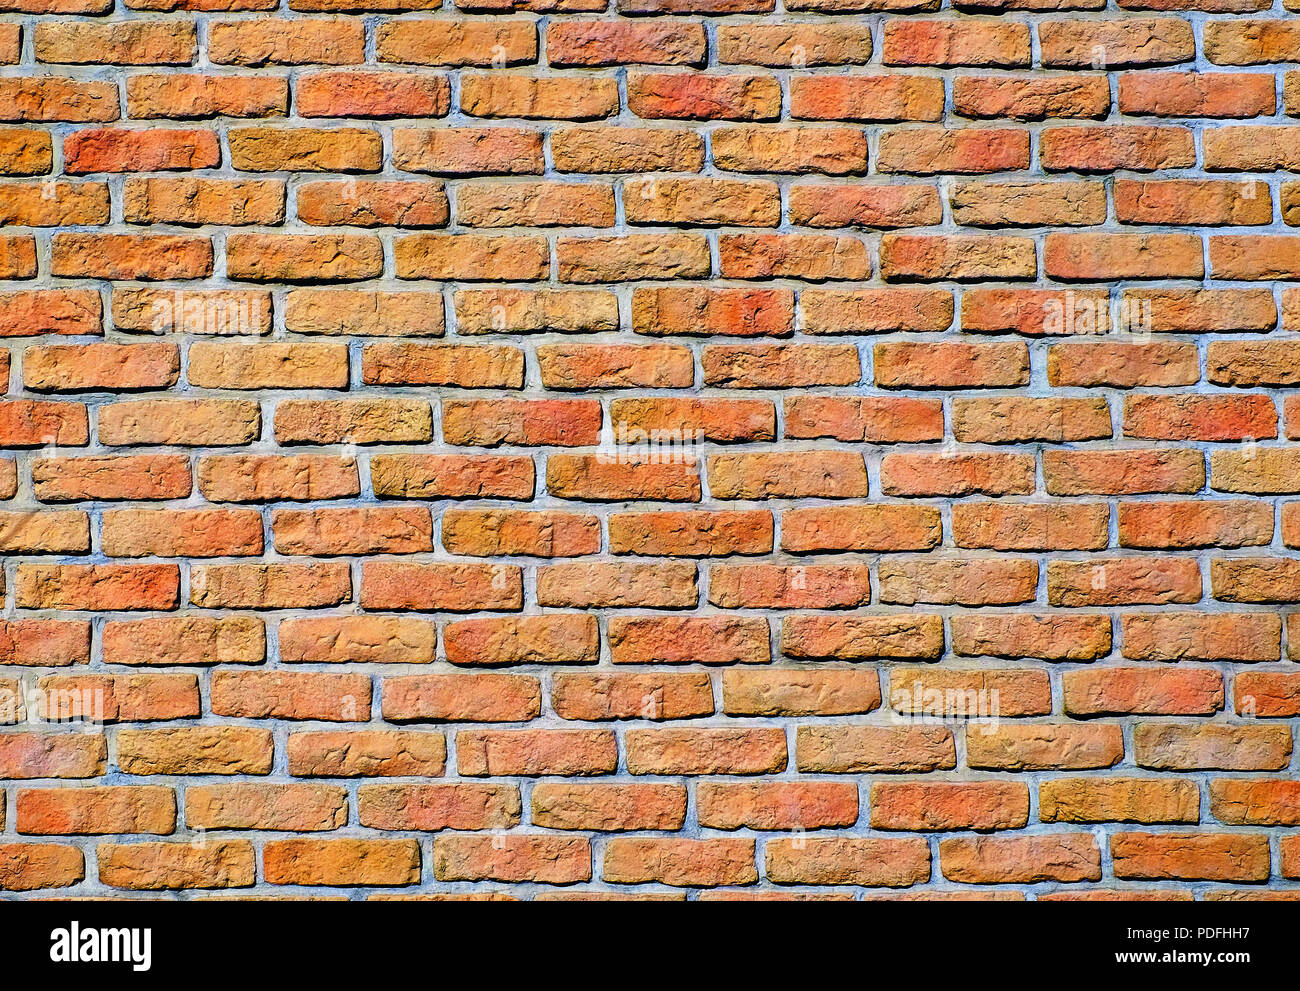 Background Of Red Brick Wall Pattern Texture Great For Graffiti Inscriptions Stock Photo Alamy